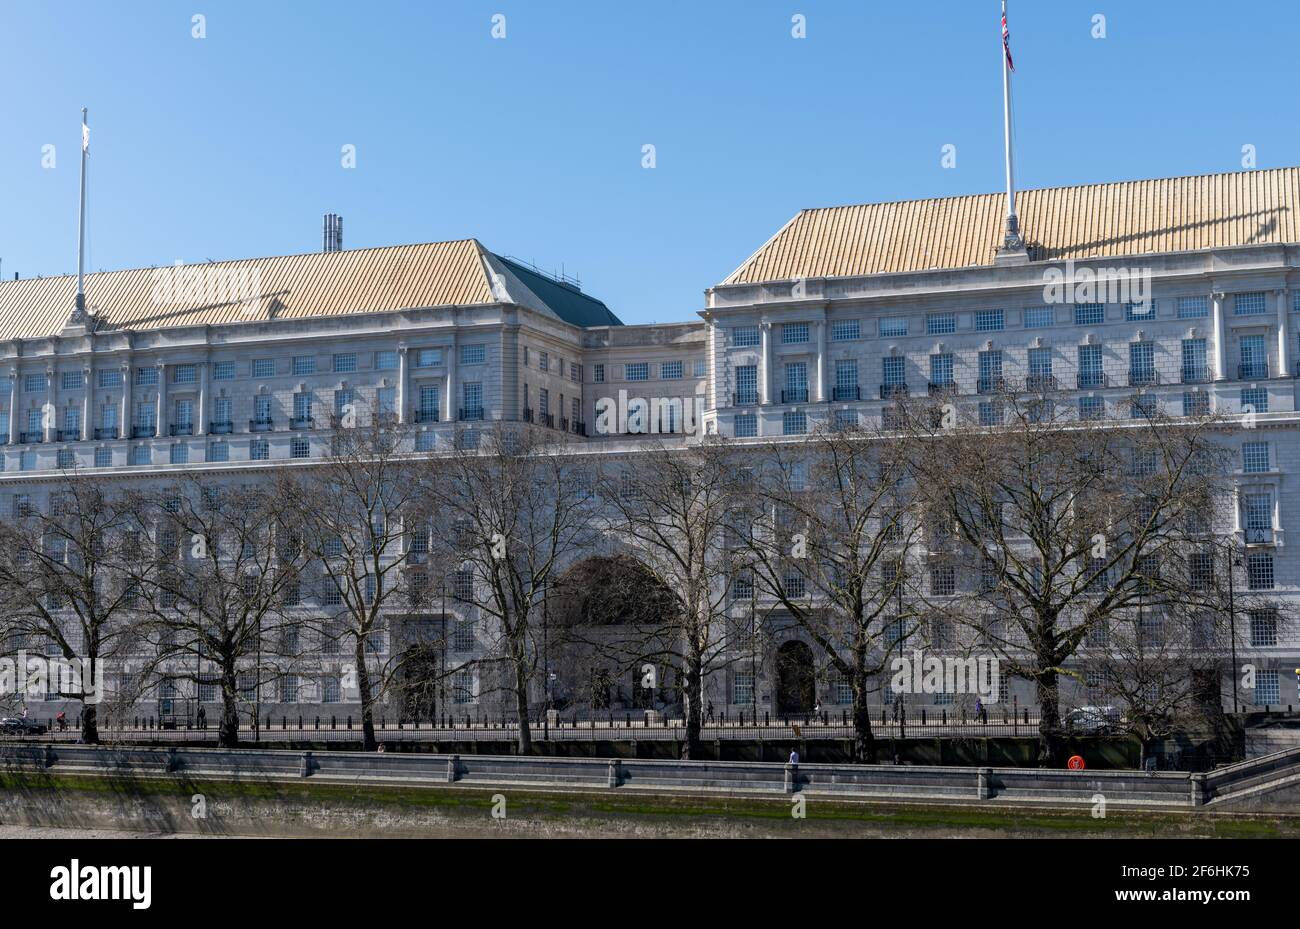 The headquarter building of MI5, British domestic secret security service responsible for homeland security and counter espionage and terrorism. Stock Photo